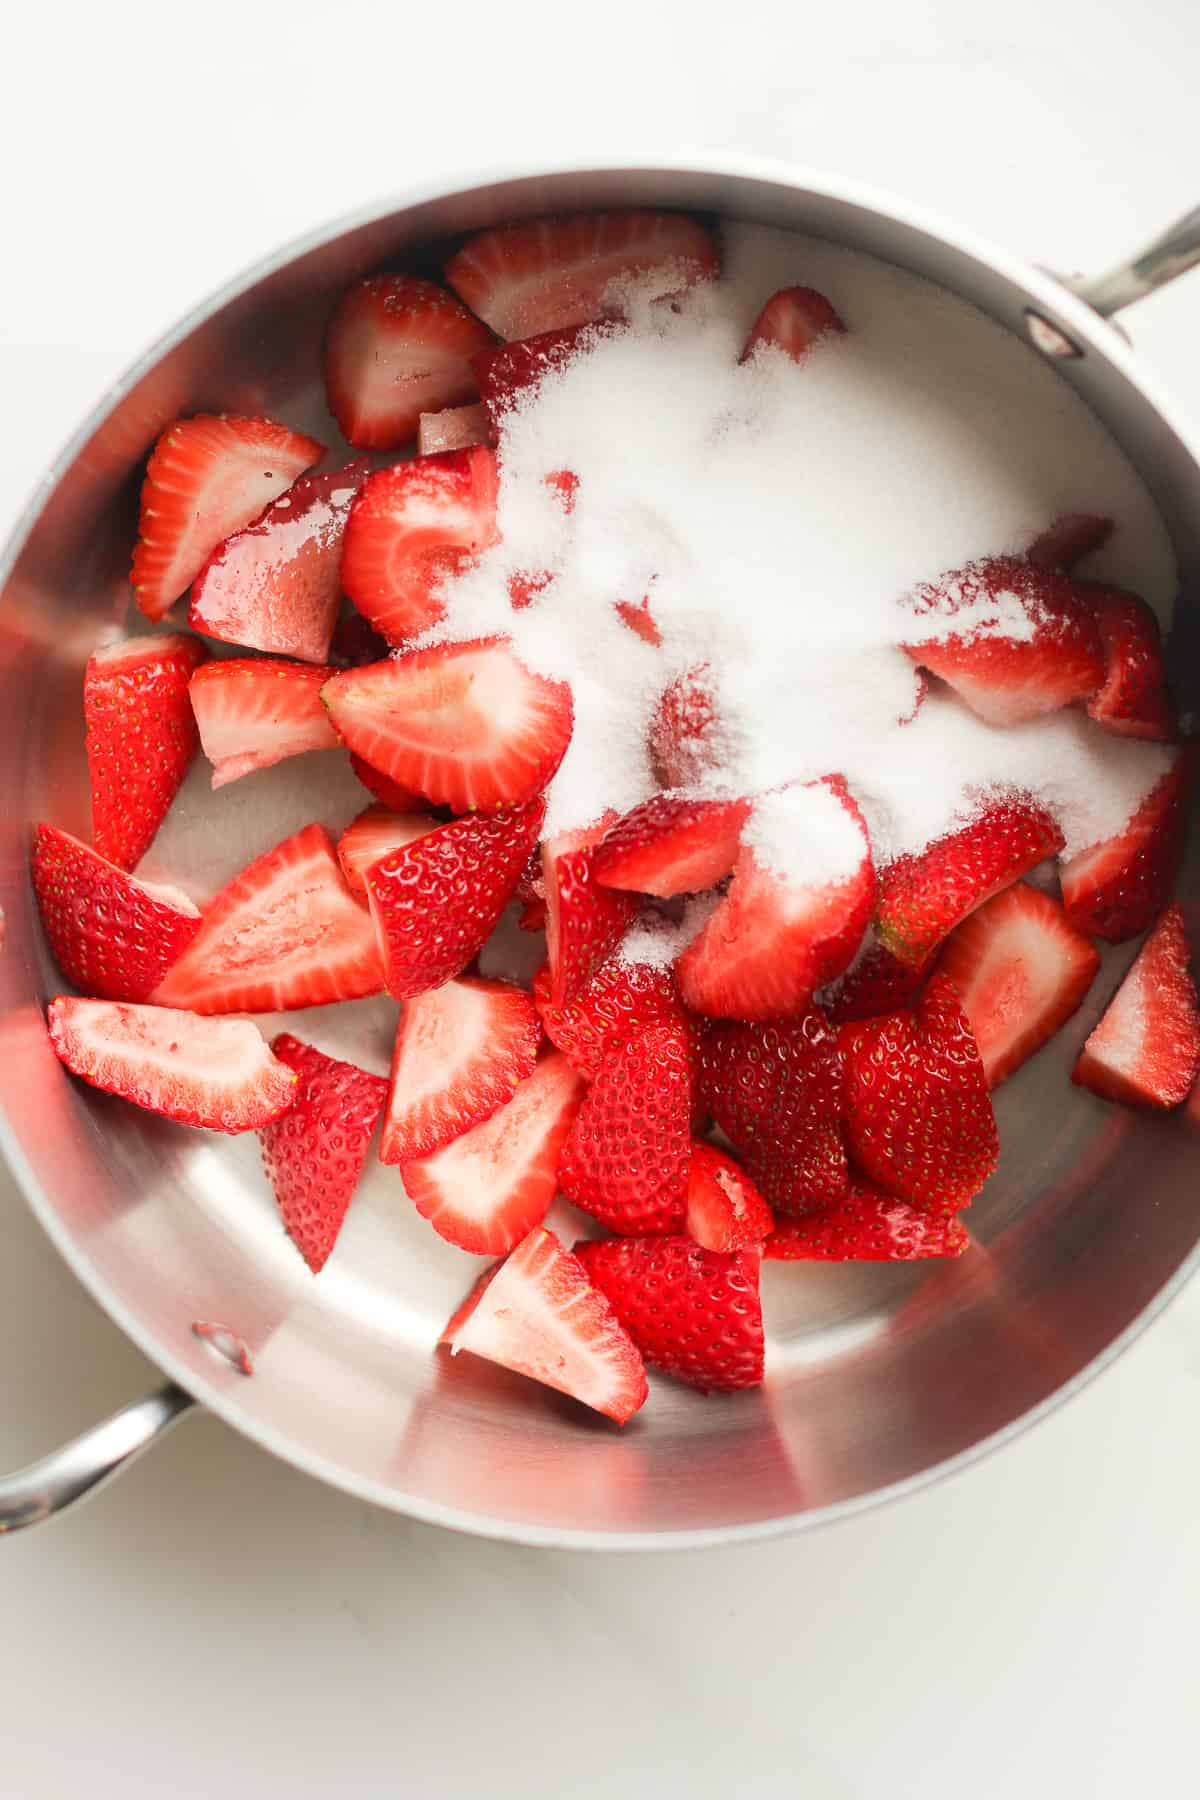 A pan of quartered strawberries with sugar.